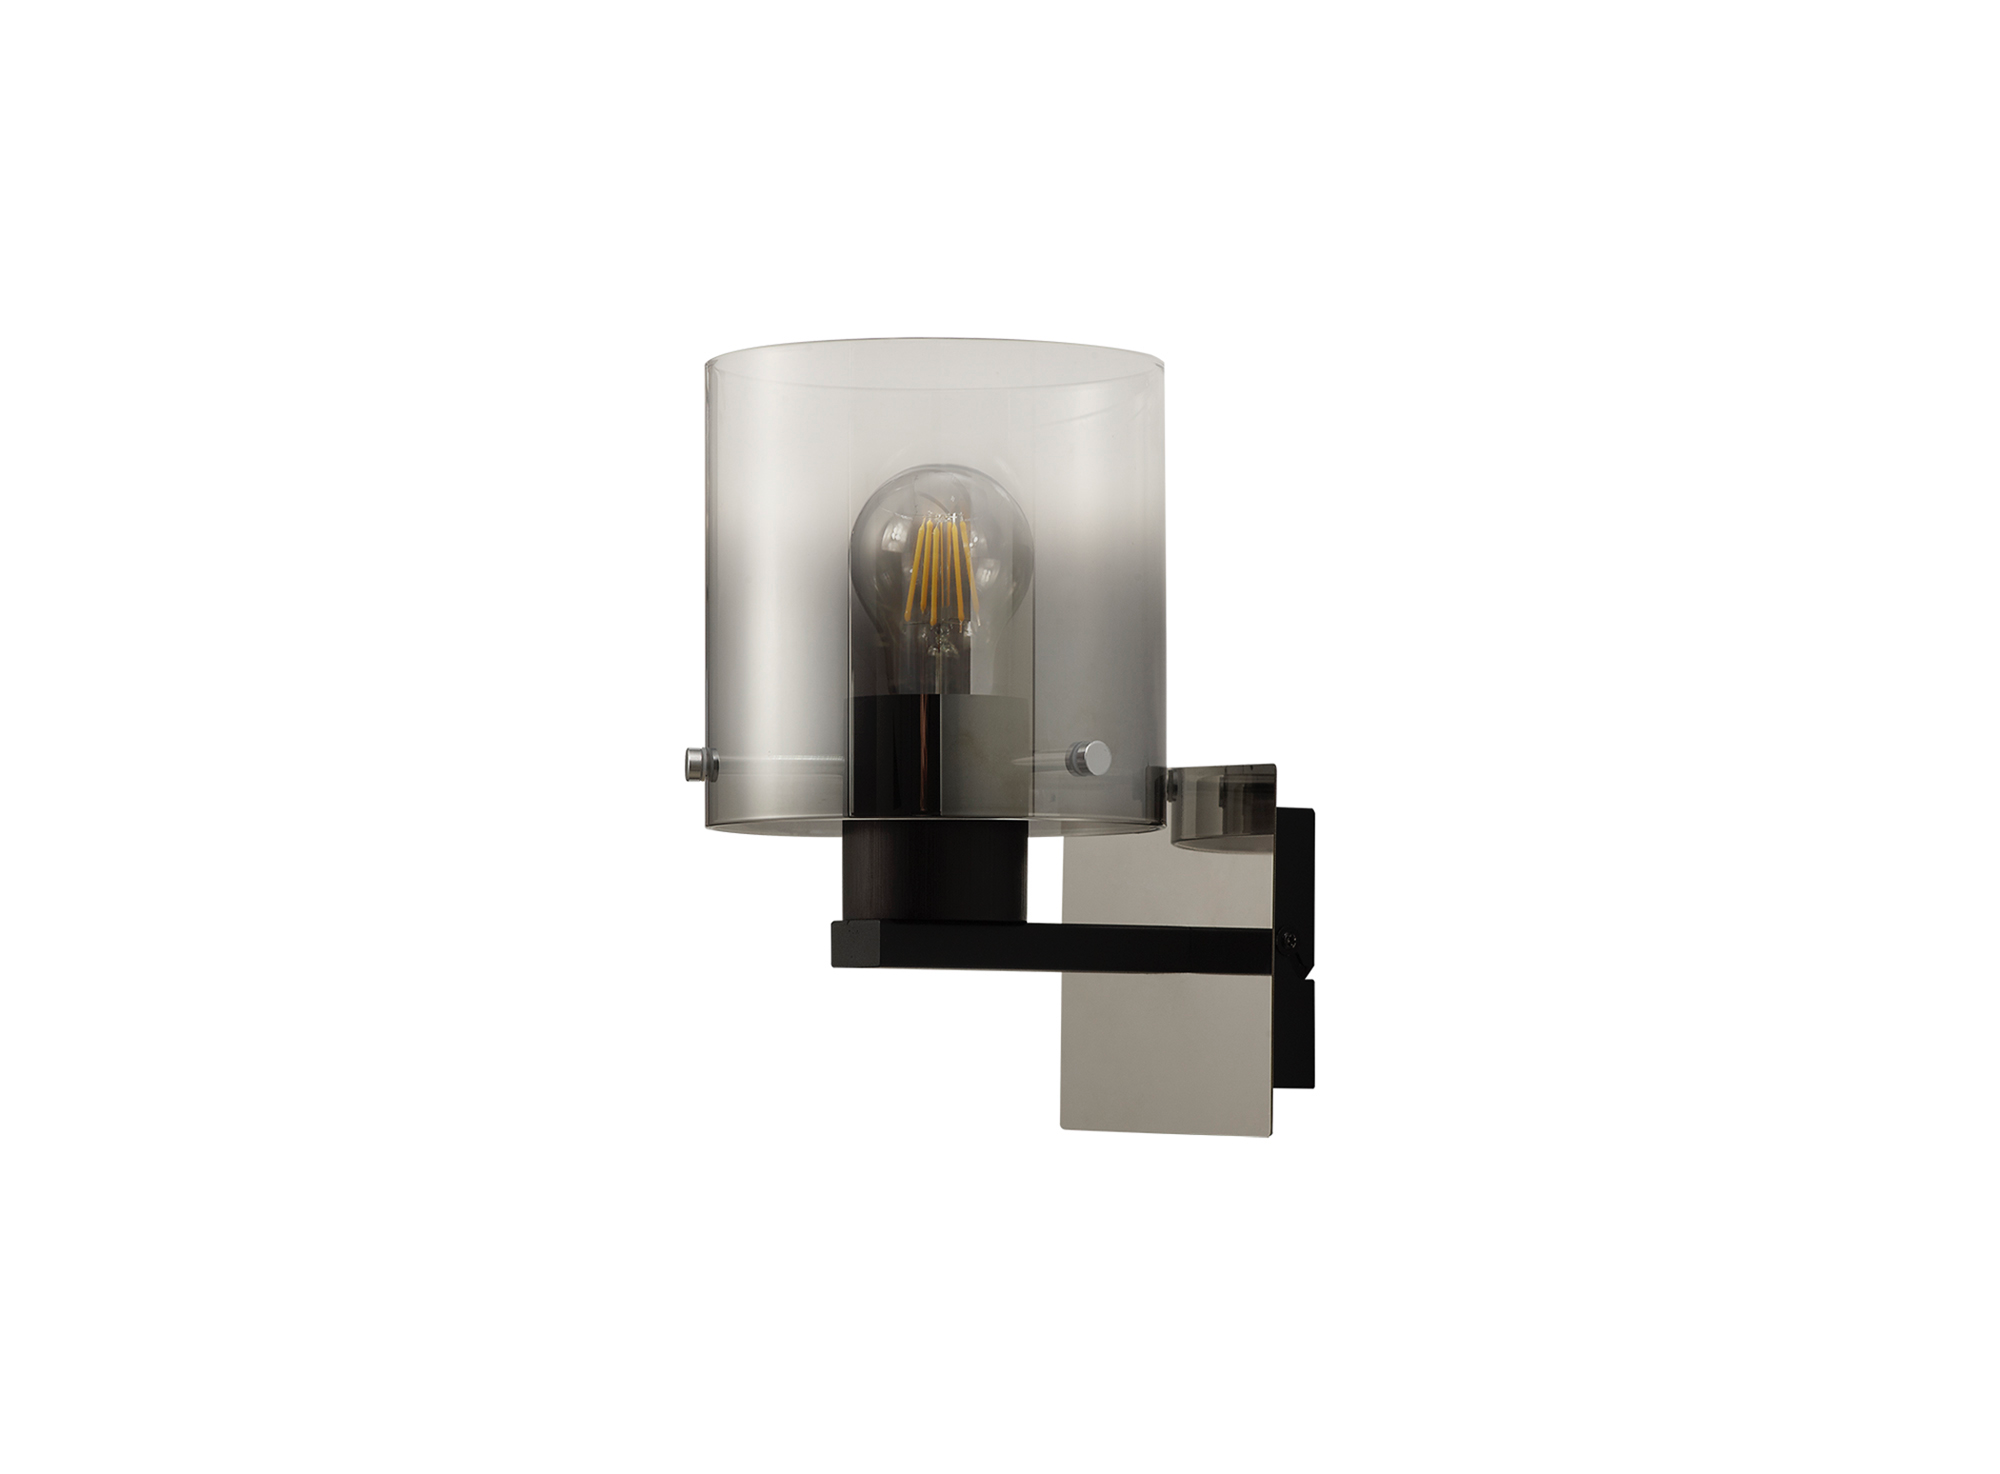 Lois Black & Chrome Smoked Glass Single Switched Wall Lamp LO176793